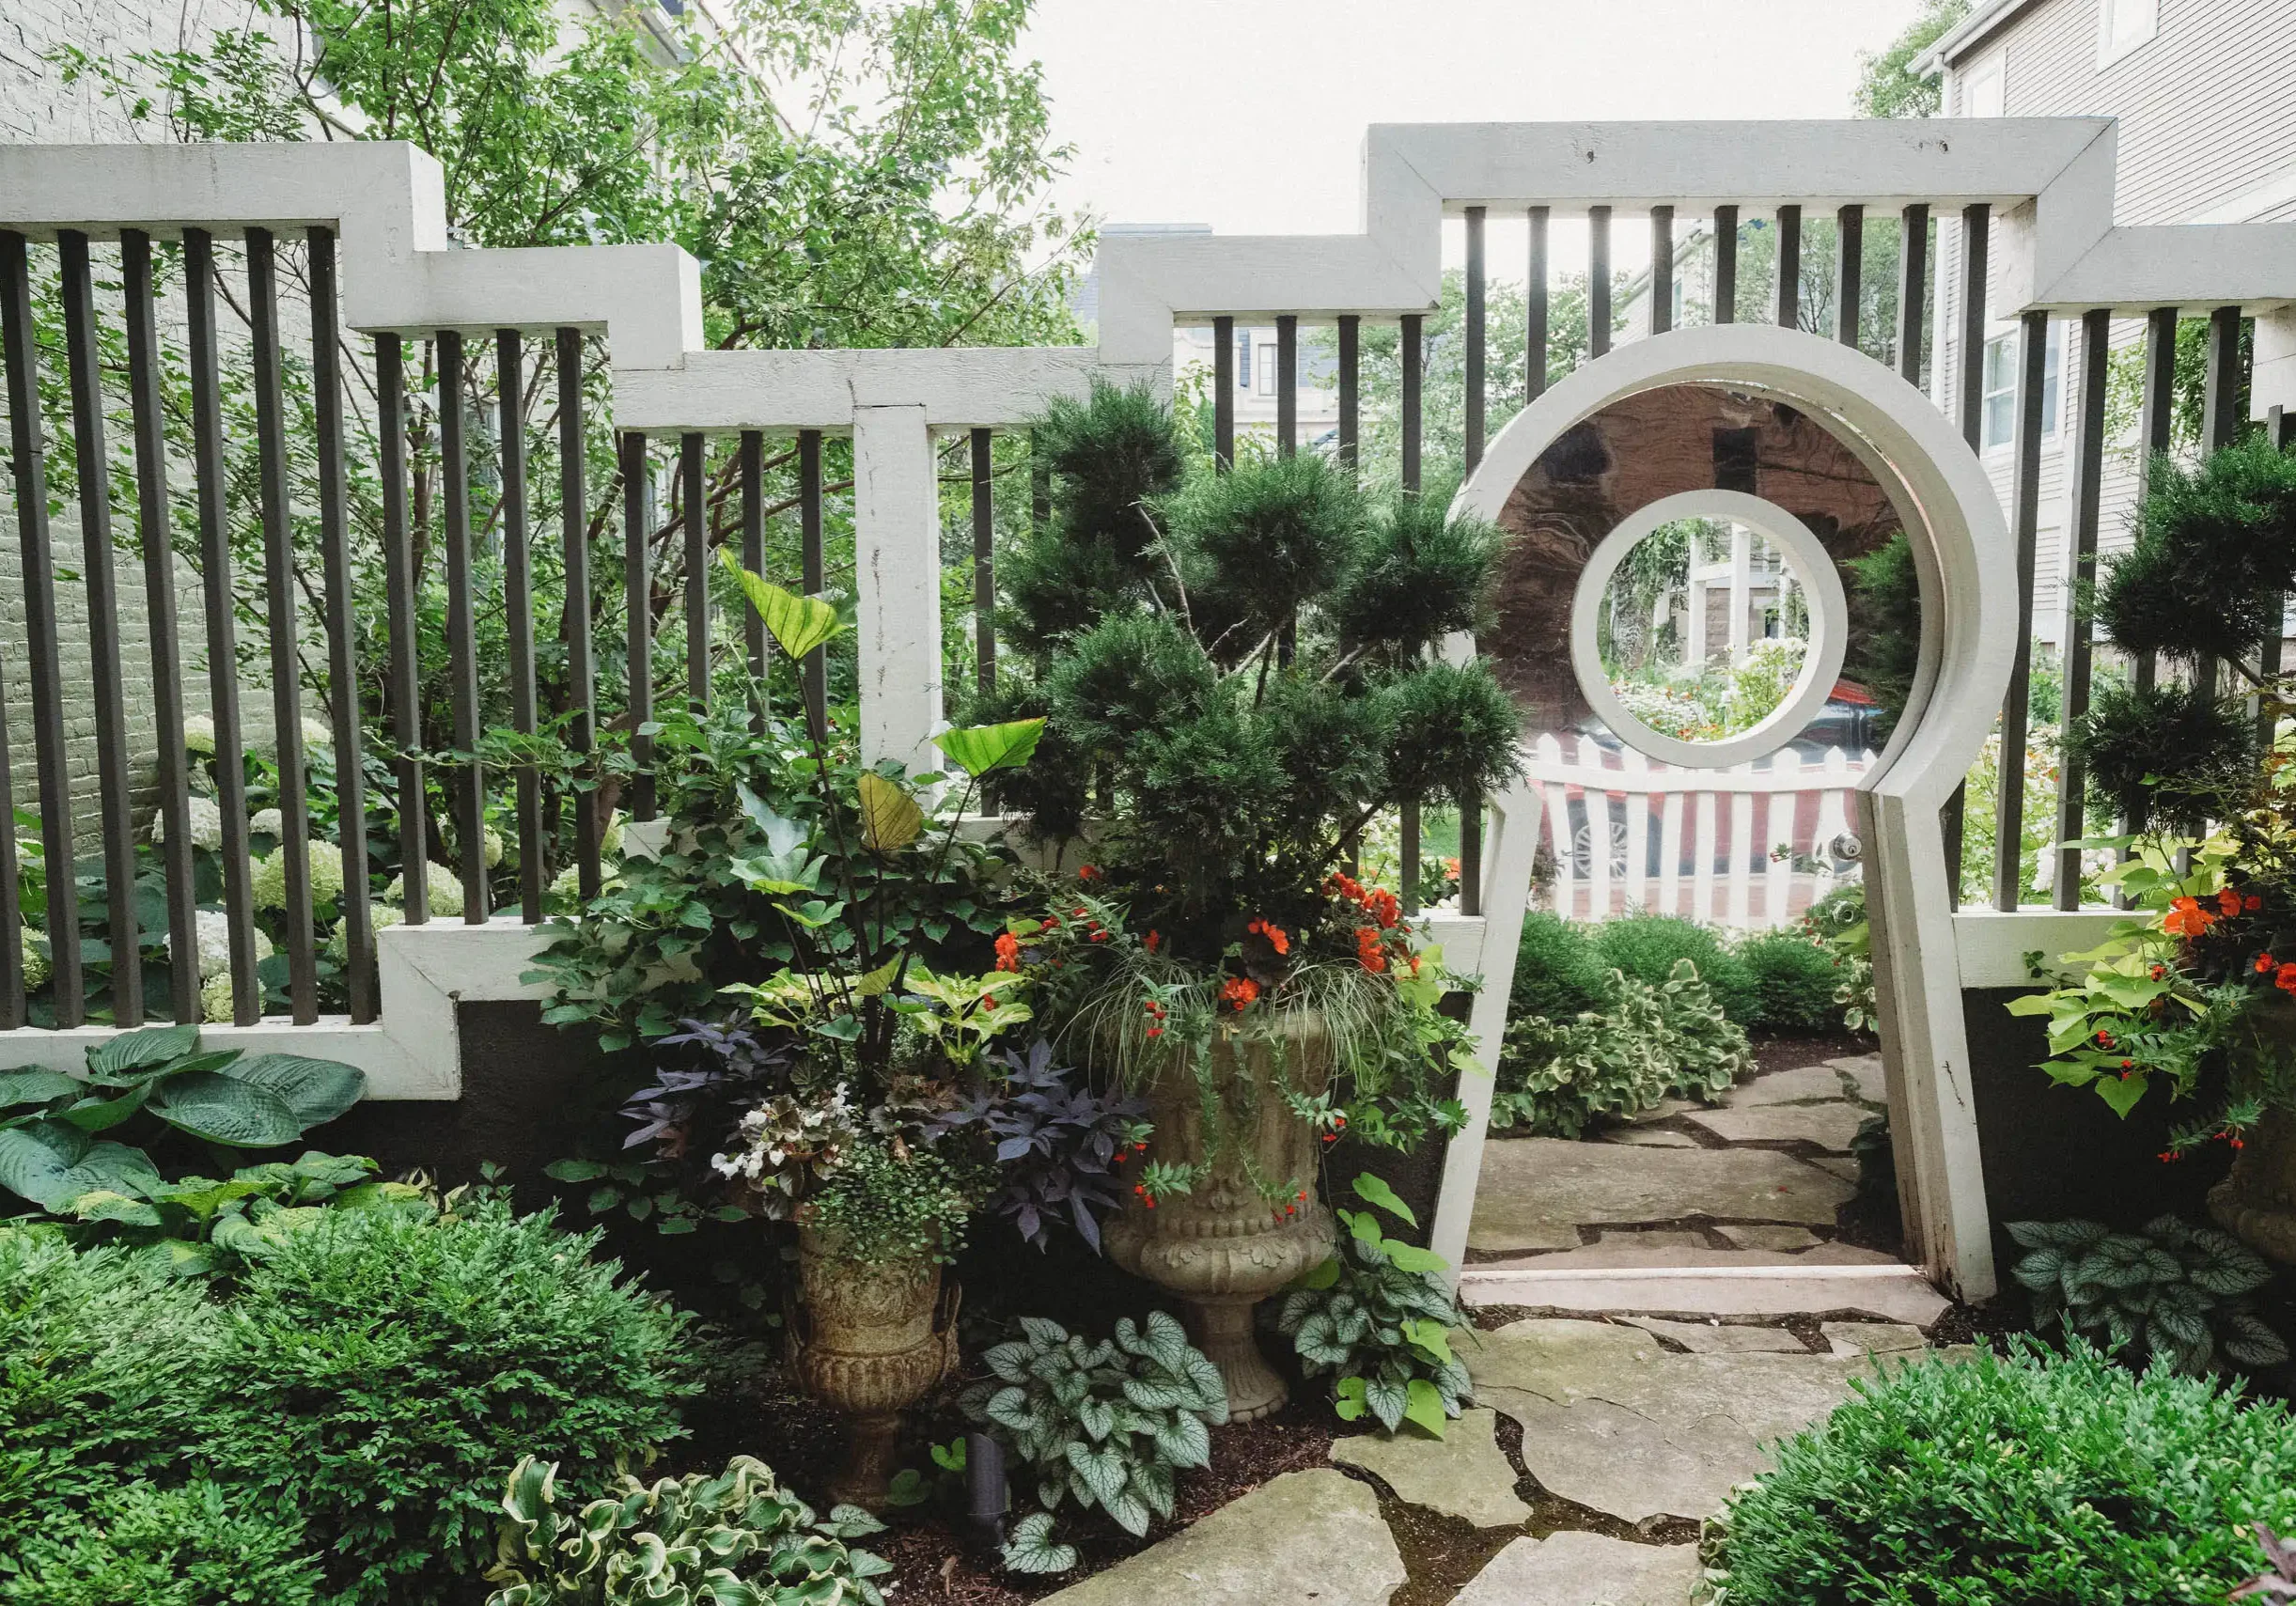 Landscaping Services Company in Wicker Park, IL